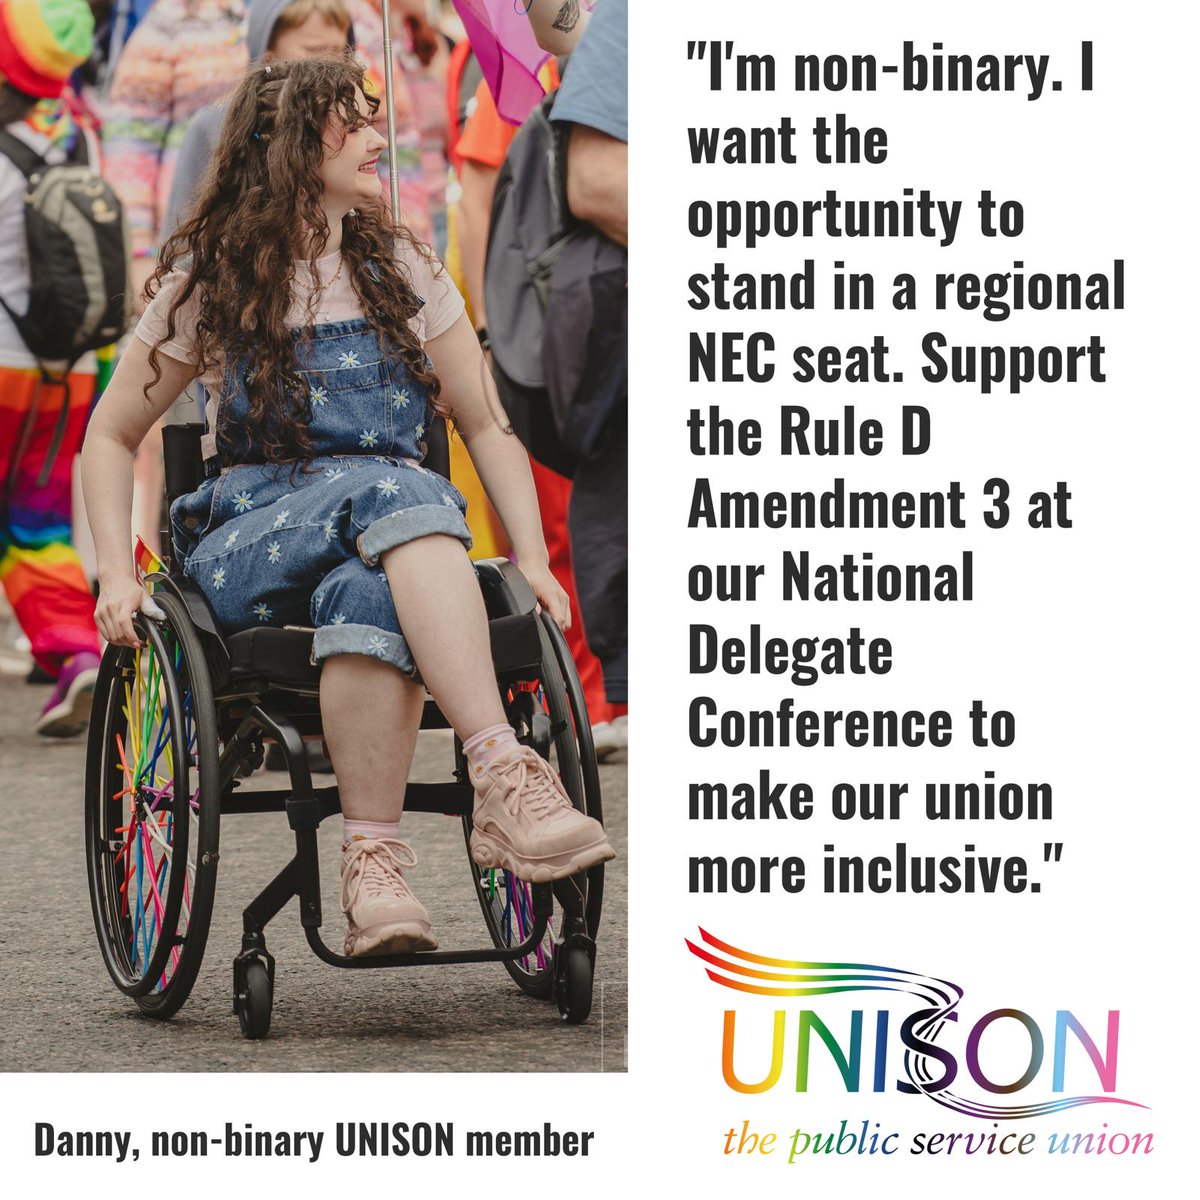 Danny is a non-binary @unisontheunion member. They are unable to stand for the NEC regional seats because they have to identify as either male or female to be eligible. We think this is unfair. Support our rule change at this year's NDC for a more inclusive union.